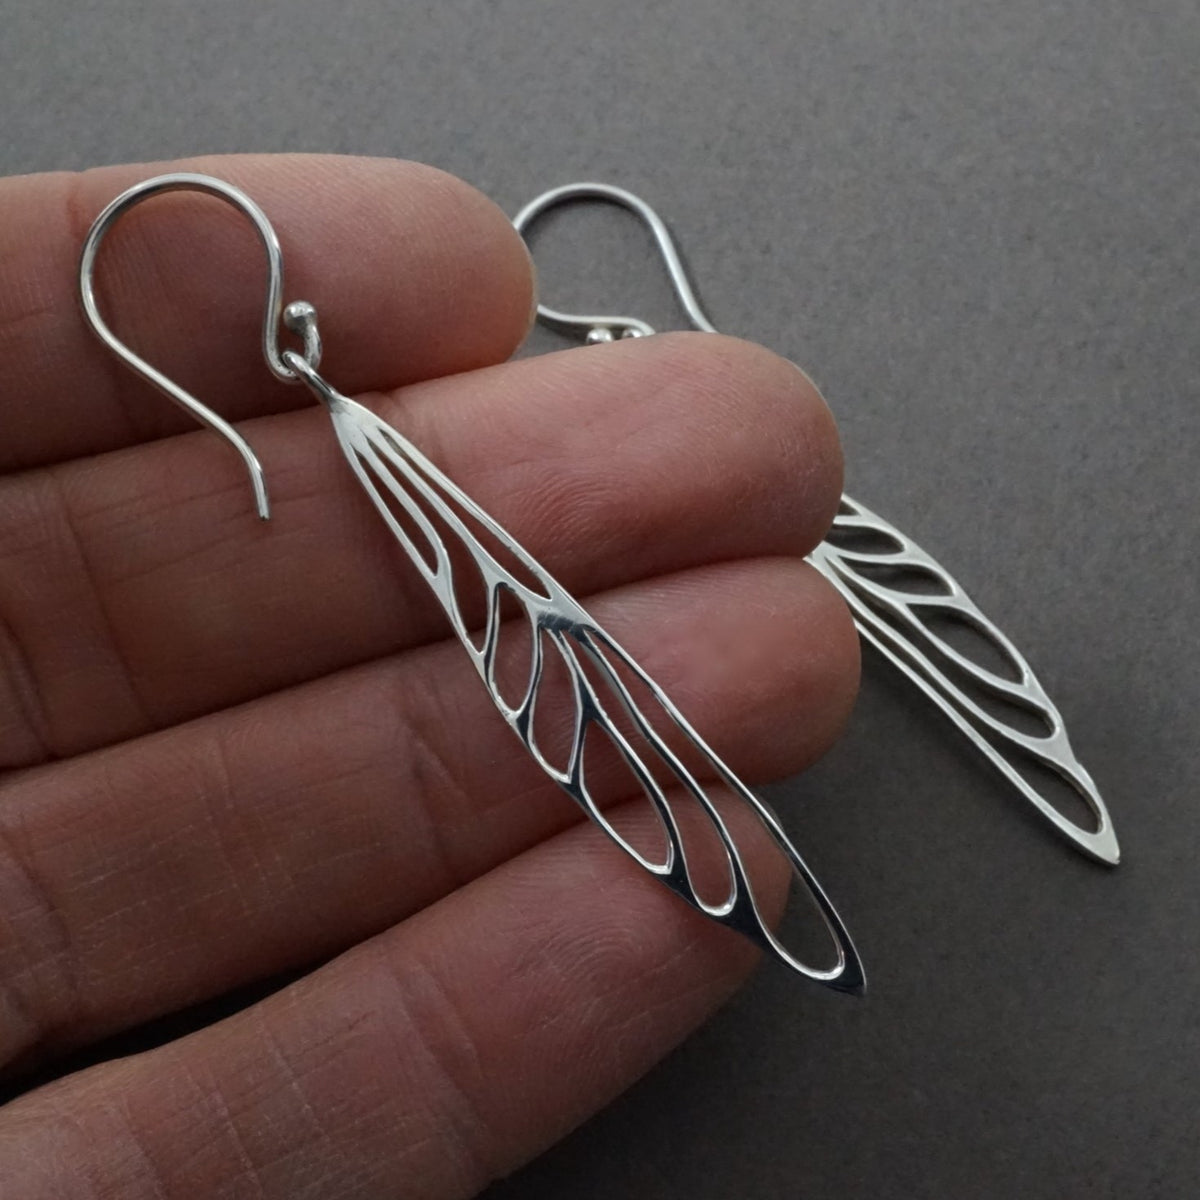 Dragonfly Wing - Solid Sterling Silver - Dangle Earrings - boho insect Jewelry